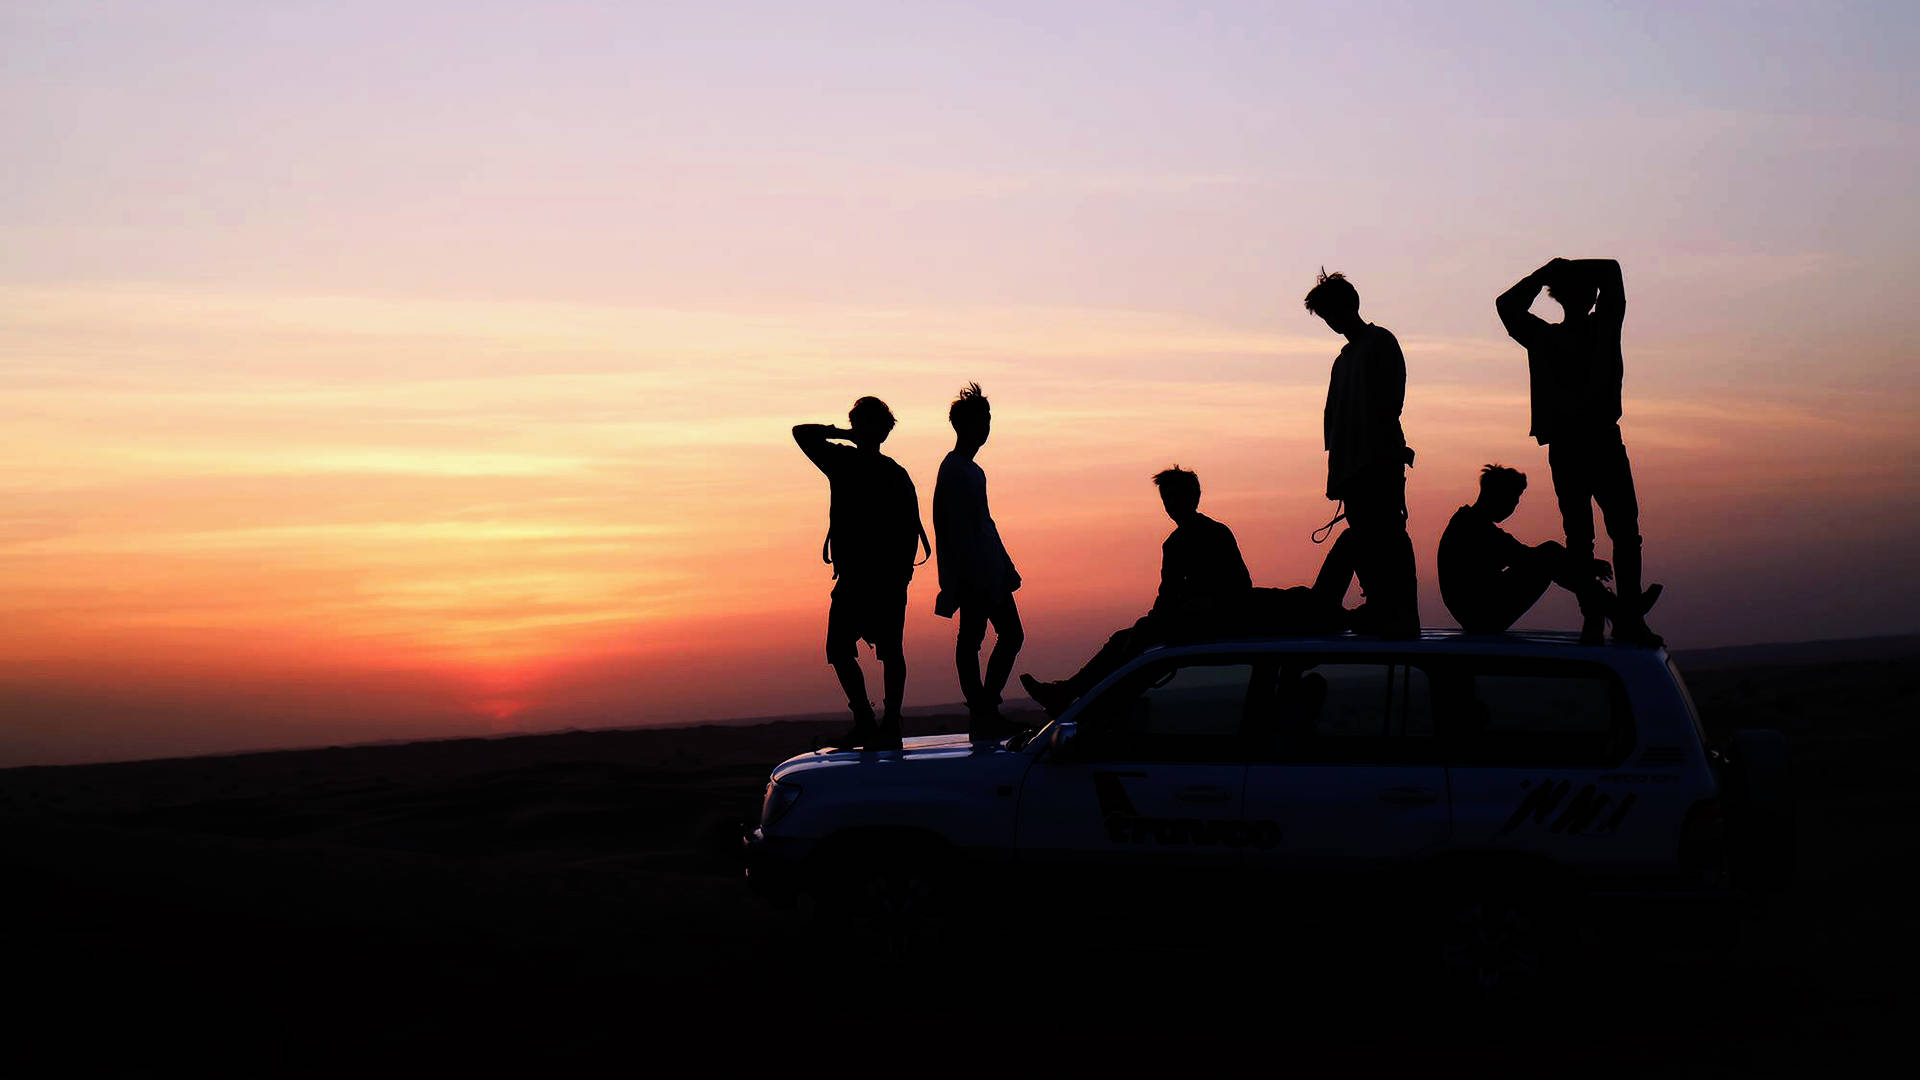 Cute Bts Drawing Silhouette Background